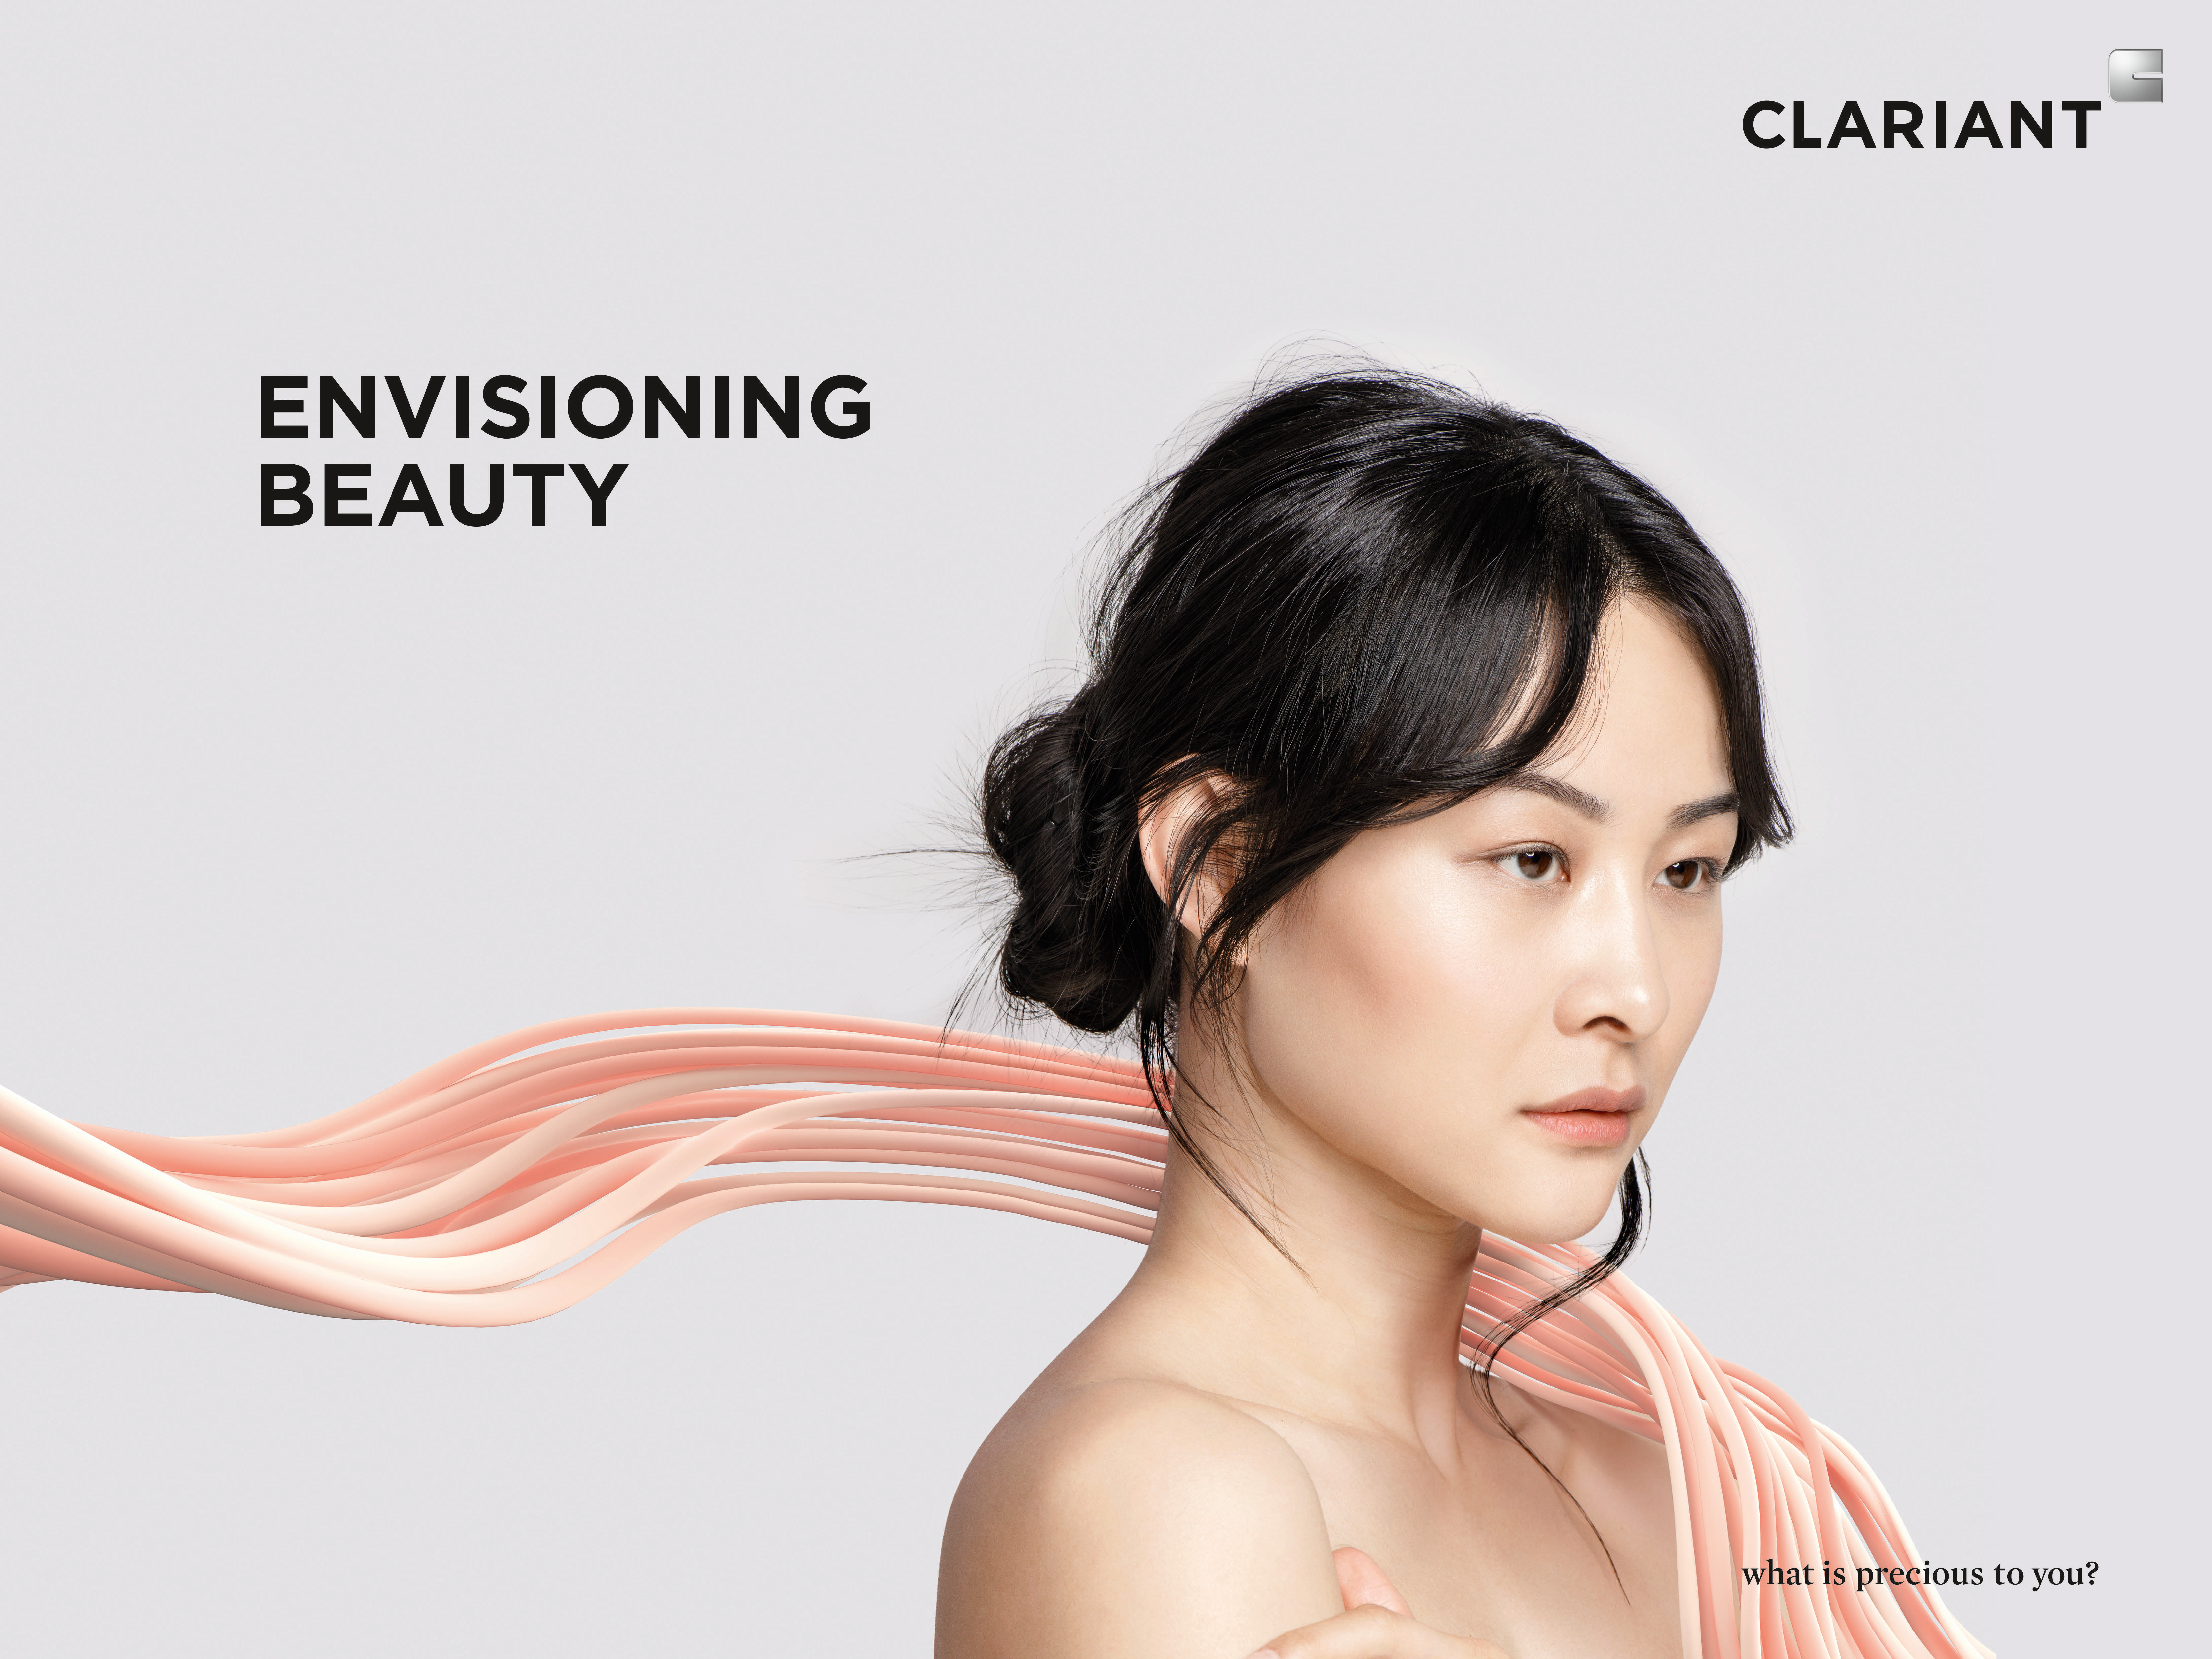 Clariant's Envisioning Beauty brand addresses the need for more natural, high-performing and socia...